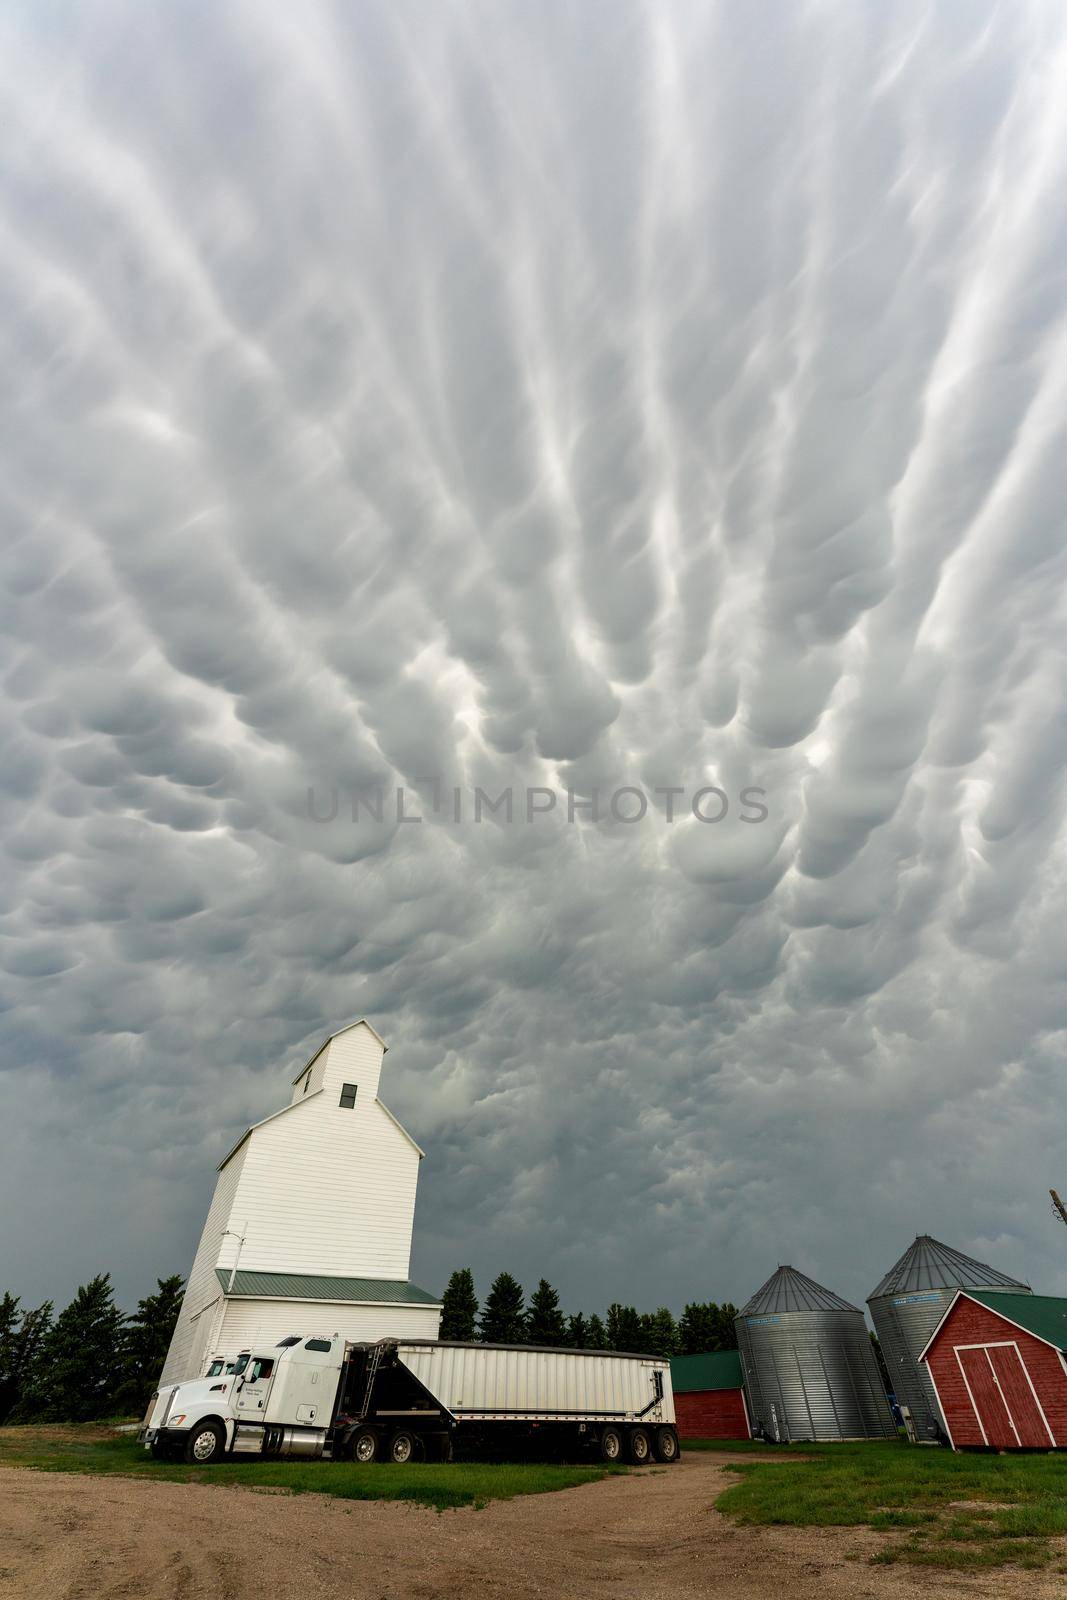 Prairie Storm Clouds mammatus by pictureguy